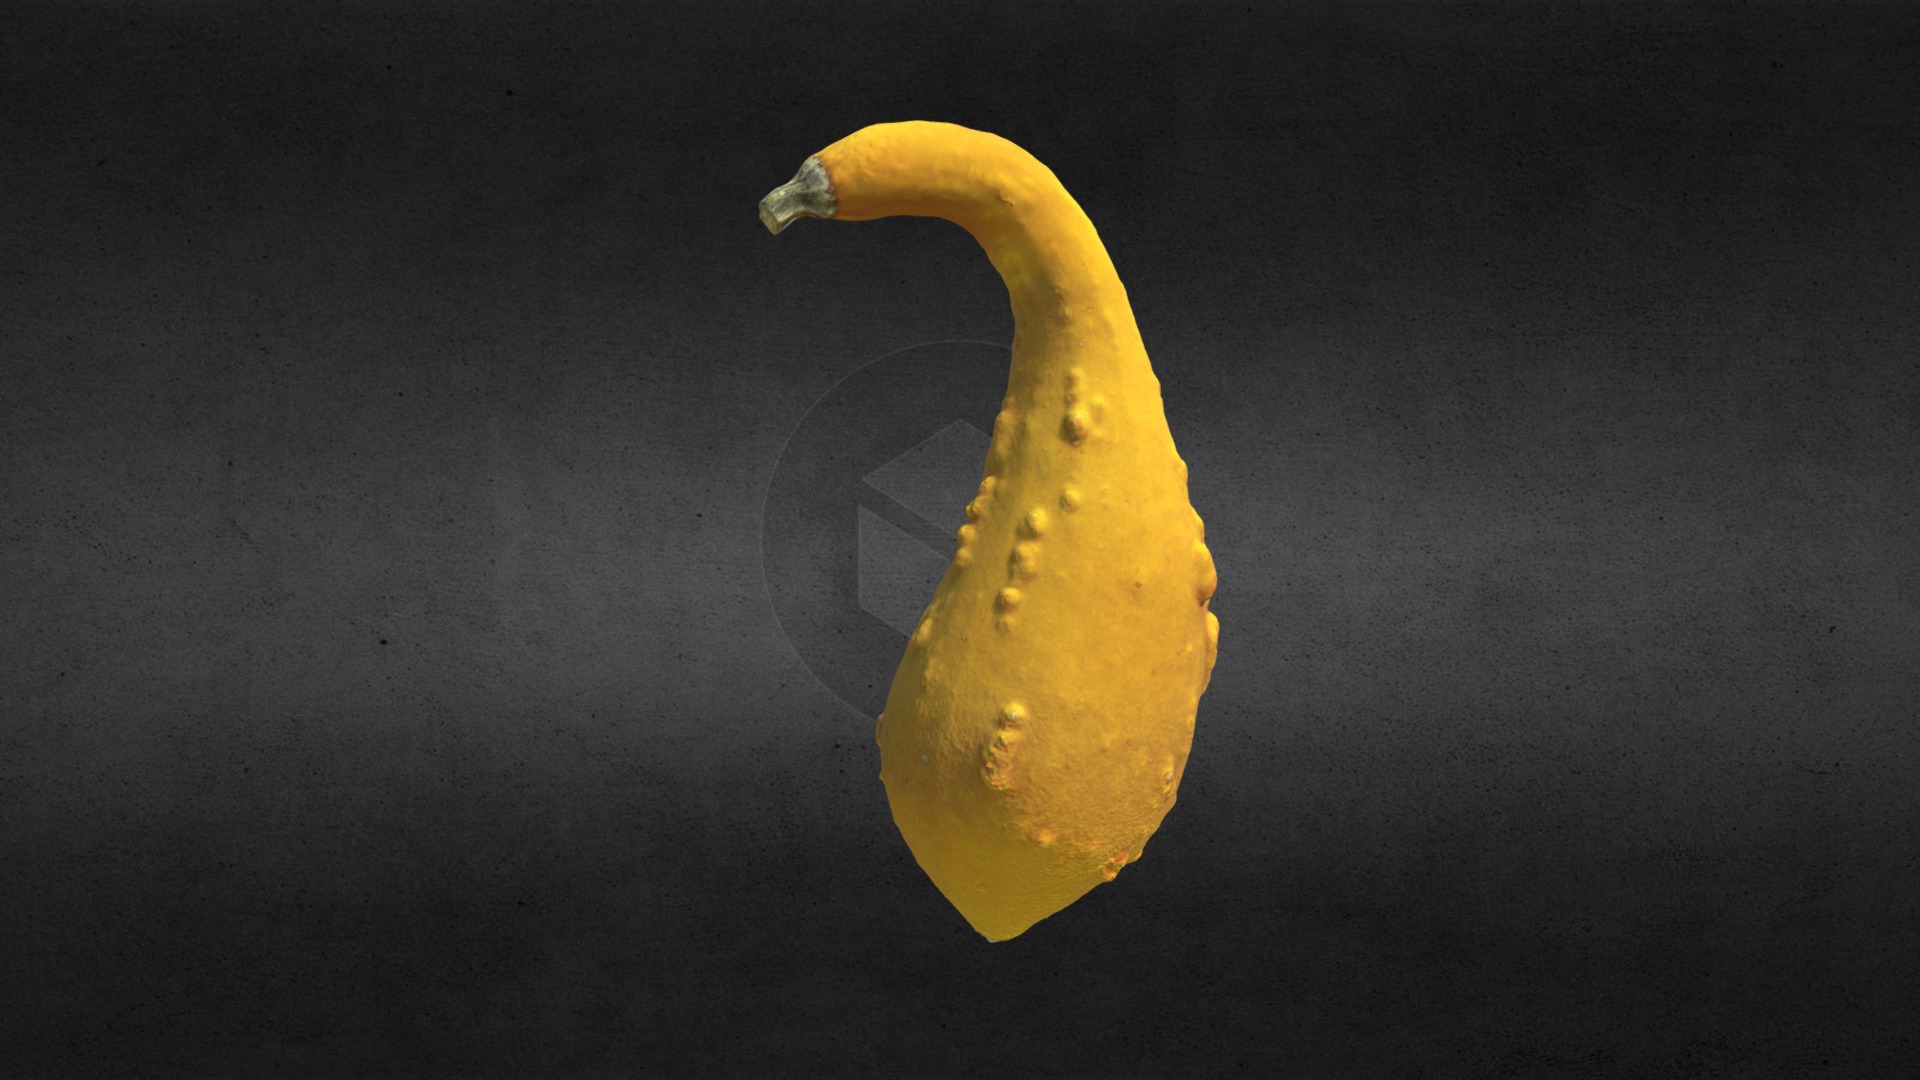 3D model Pumpkin 3 High resolution - This is a 3D model of the Pumpkin 3 High resolution. The 3D model is about a banana with a face drawn on it.